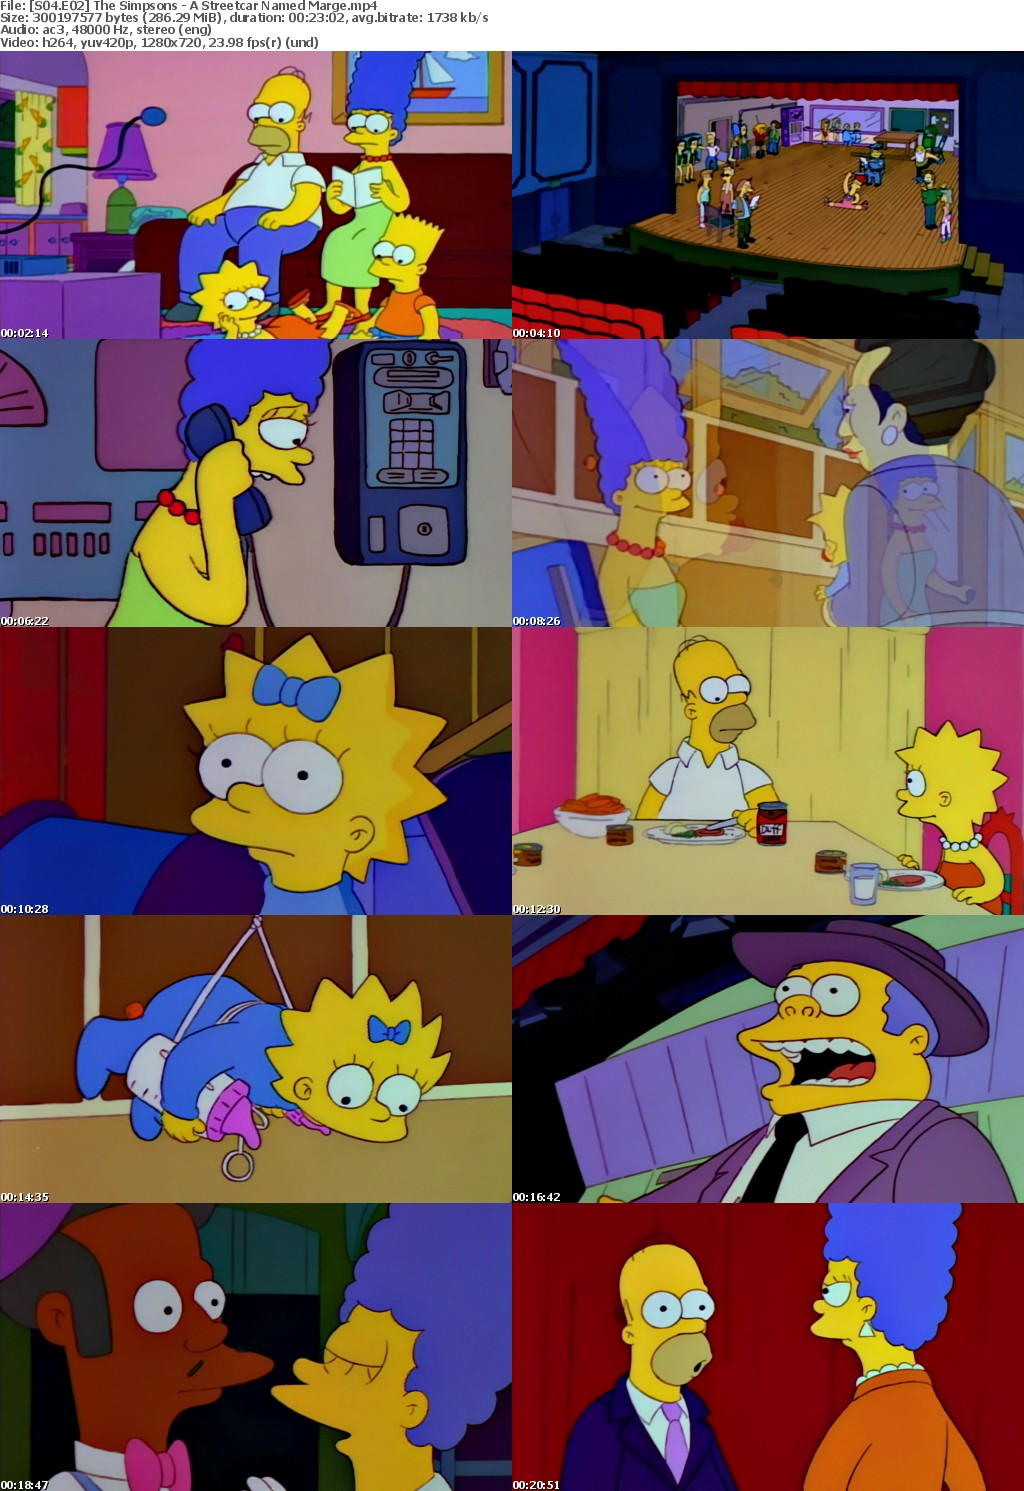 The Simpsons S4 E2 A Streetcar Named Marge MP4 720p H264 WEBRip EzzRips